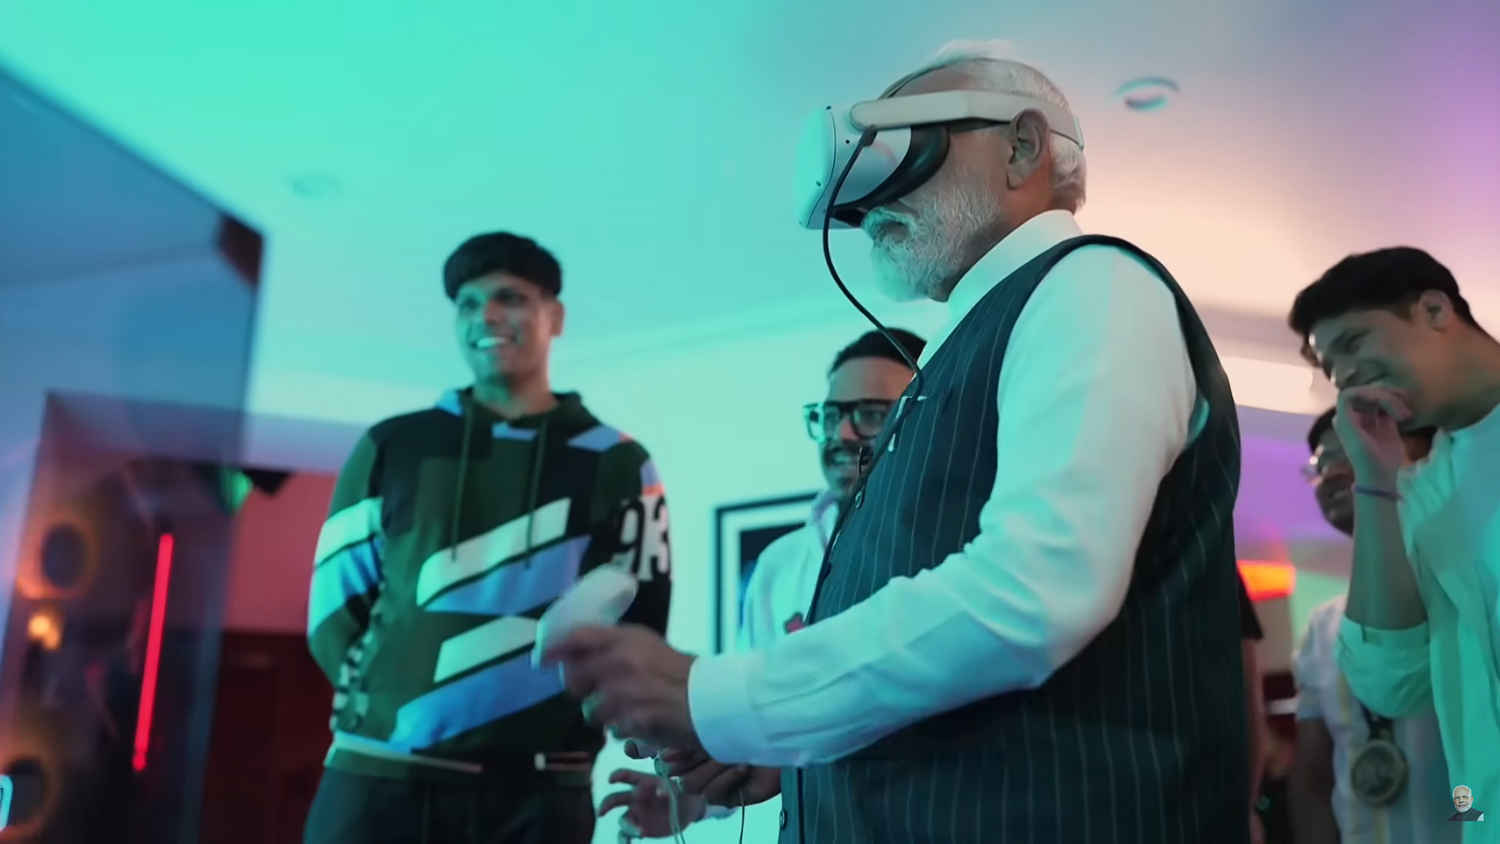 PM Modi meets top Indian gamers: Watch him play PC & VR games